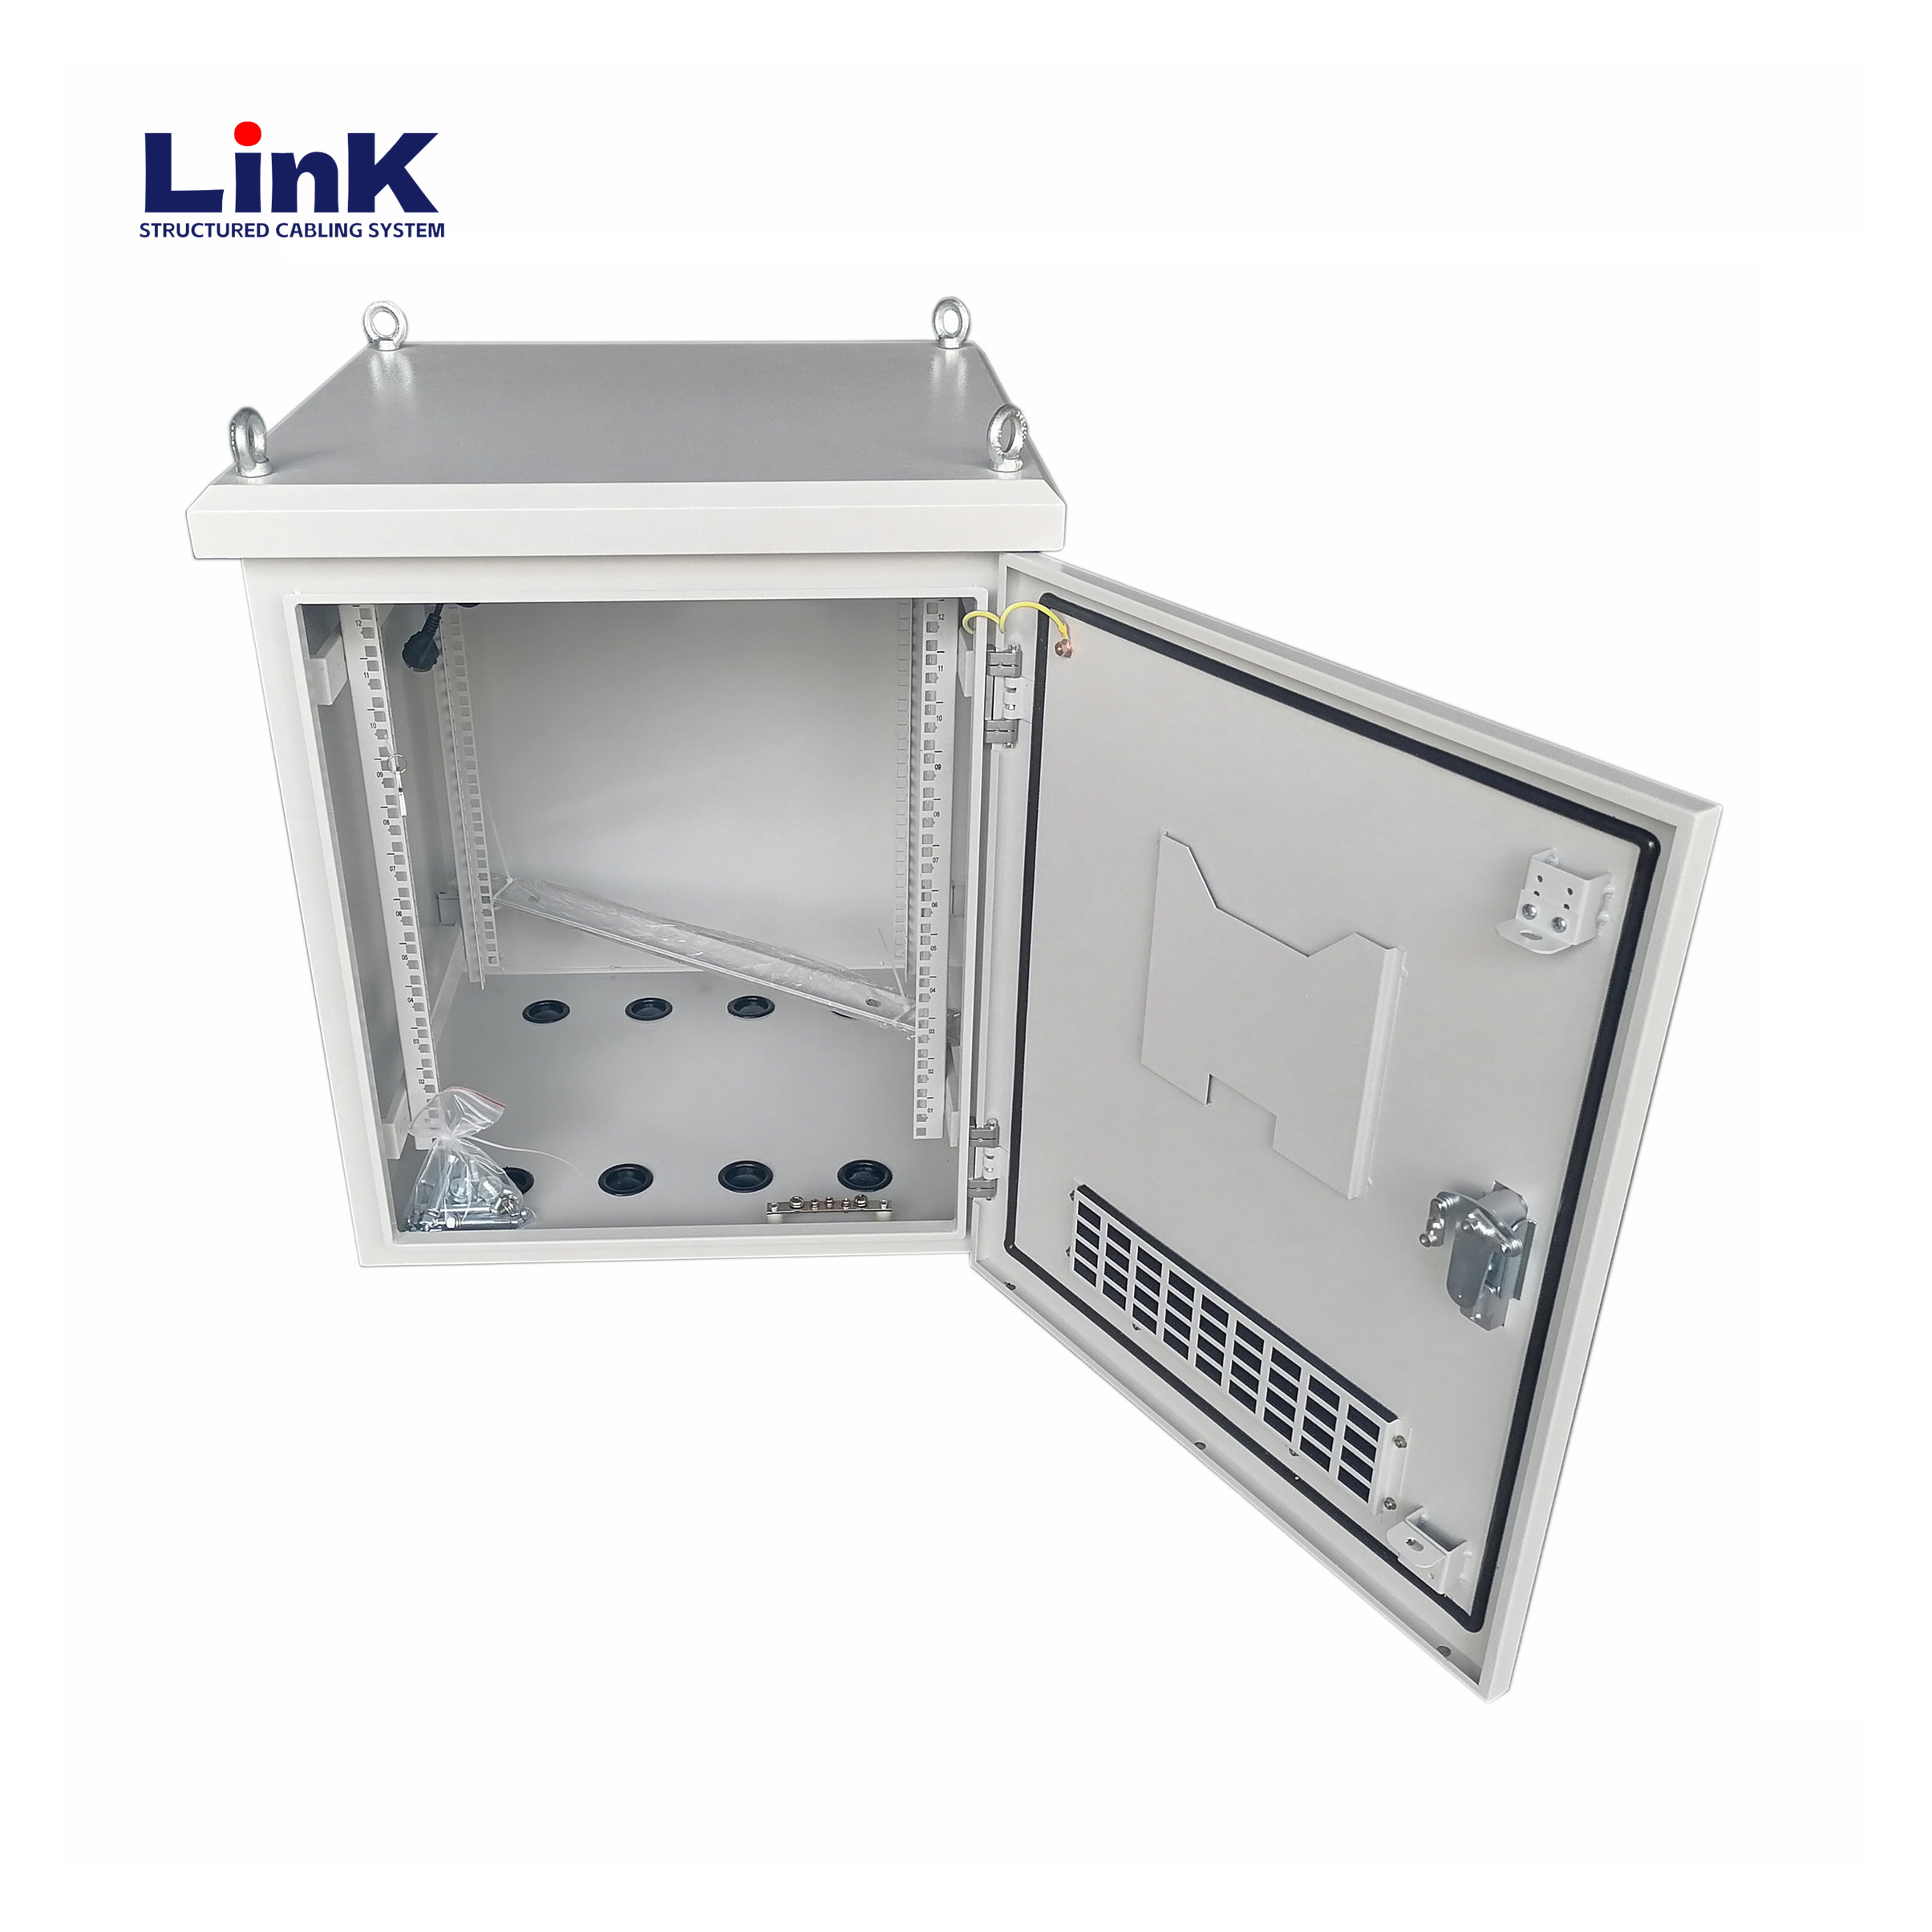 Outdoor Rack Server Cabinet Network Switch Cabinet 9u 12u 22u 36u 42u 47u Indoor Outdoor Network Server telecom Cabinet